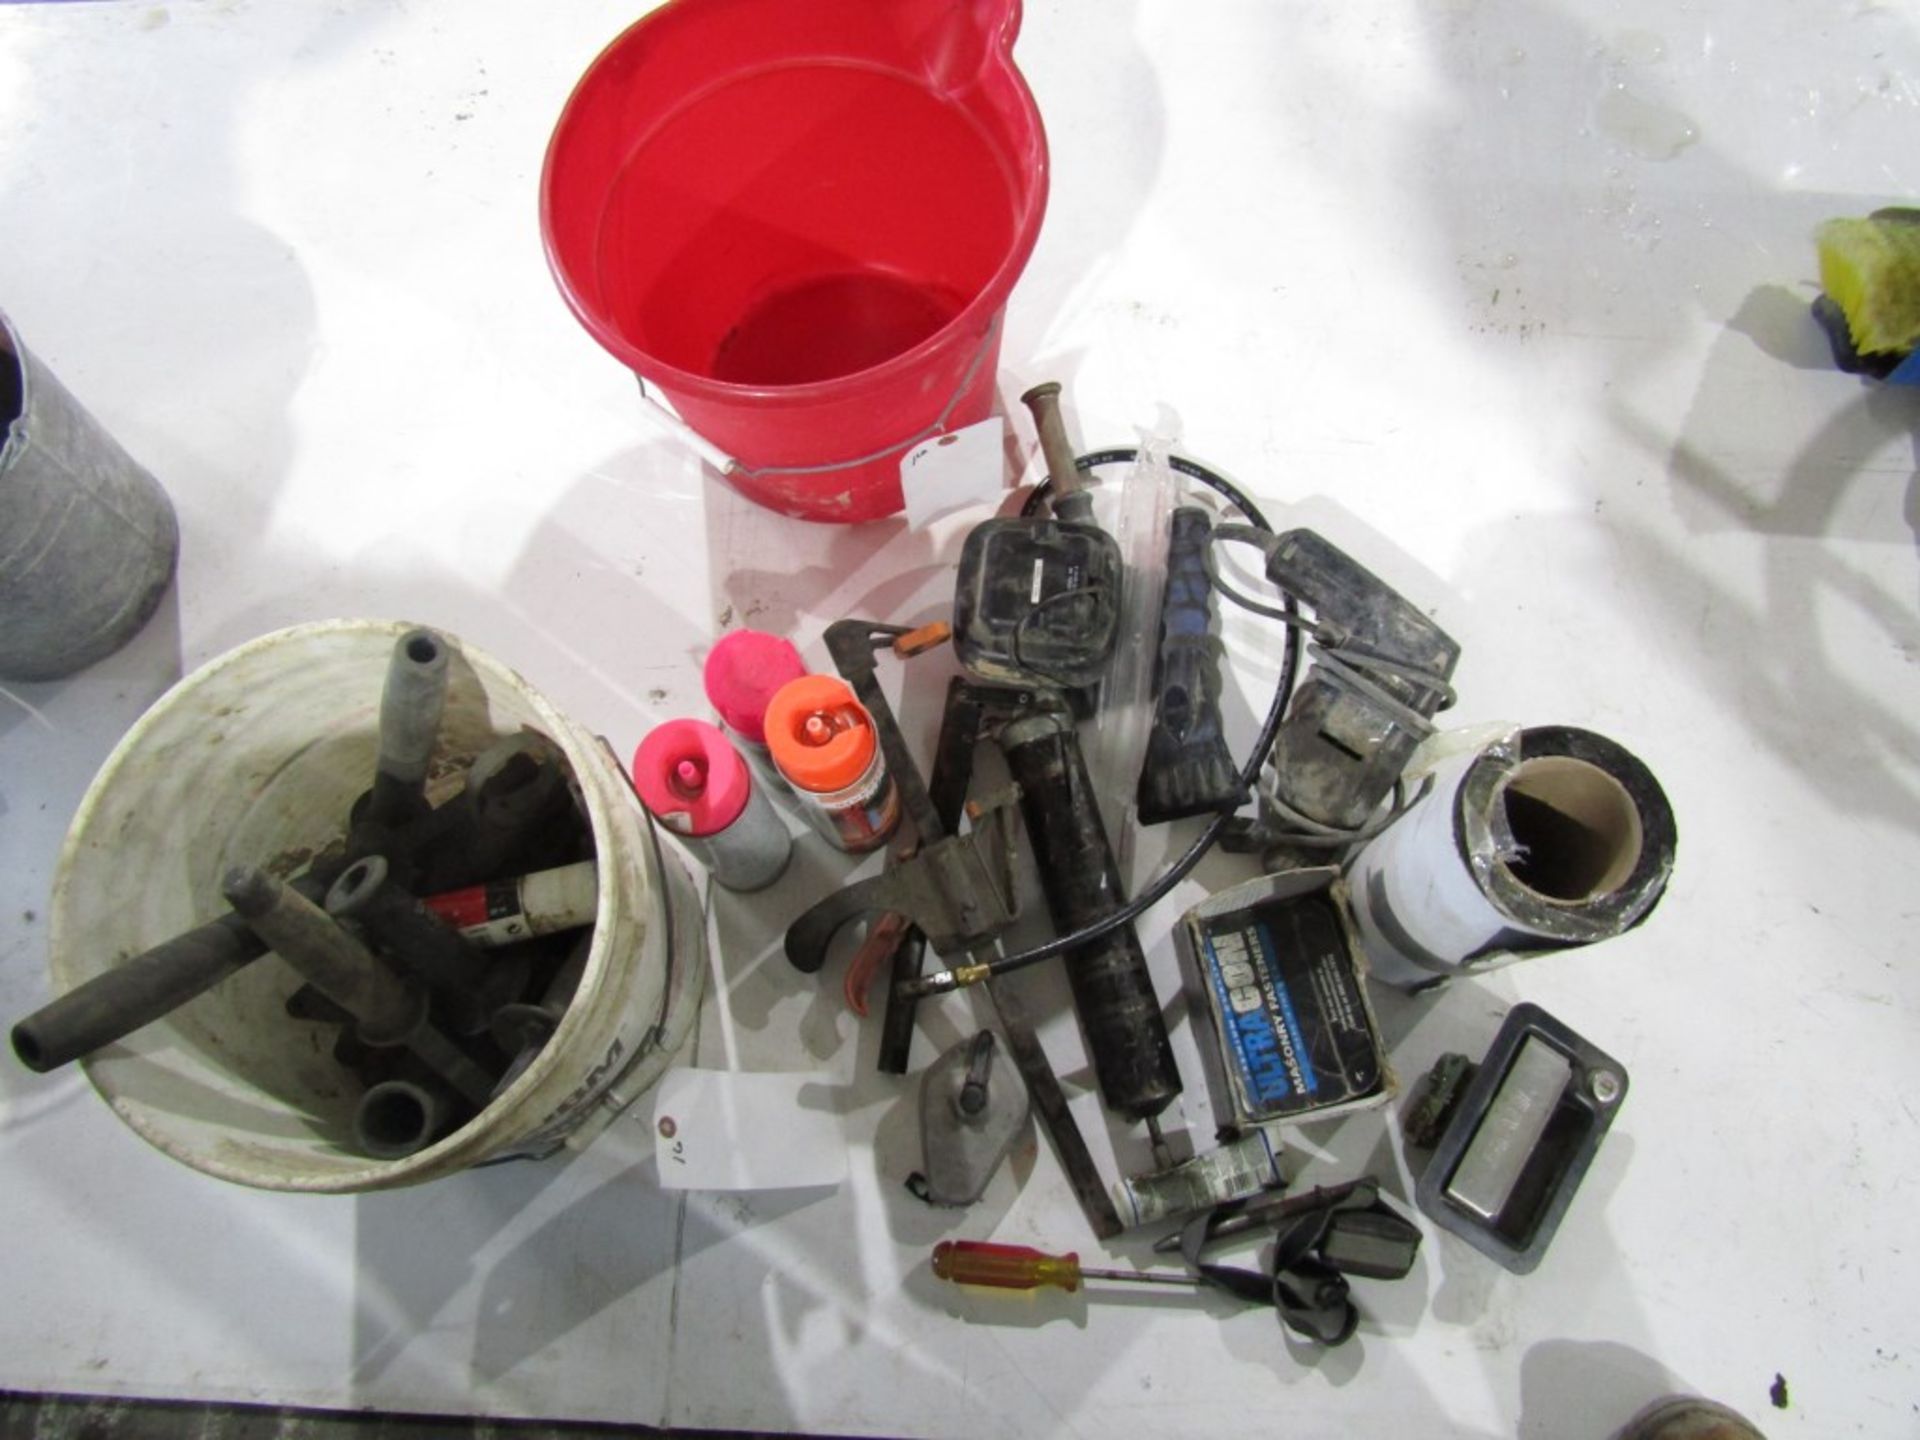 Bucket of Miscellaneous Items